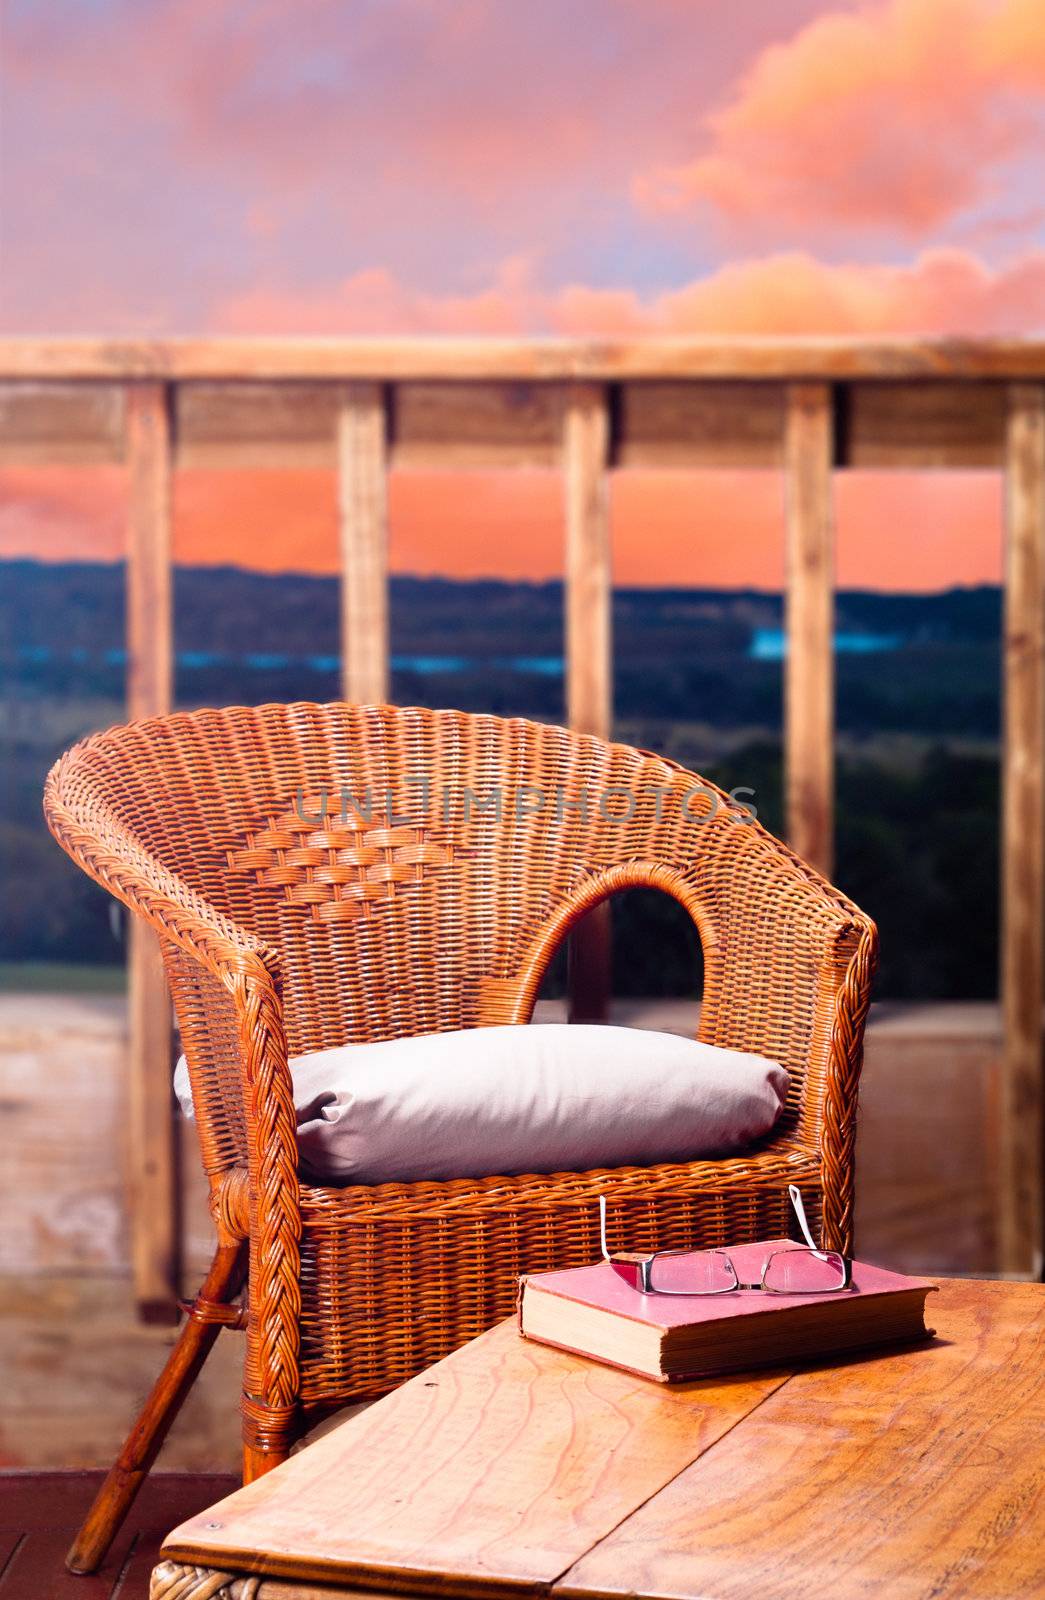 Wicker chair with pillow next to a wooden table with a book and reading glasses on it, with a view of a river at sunset in the background